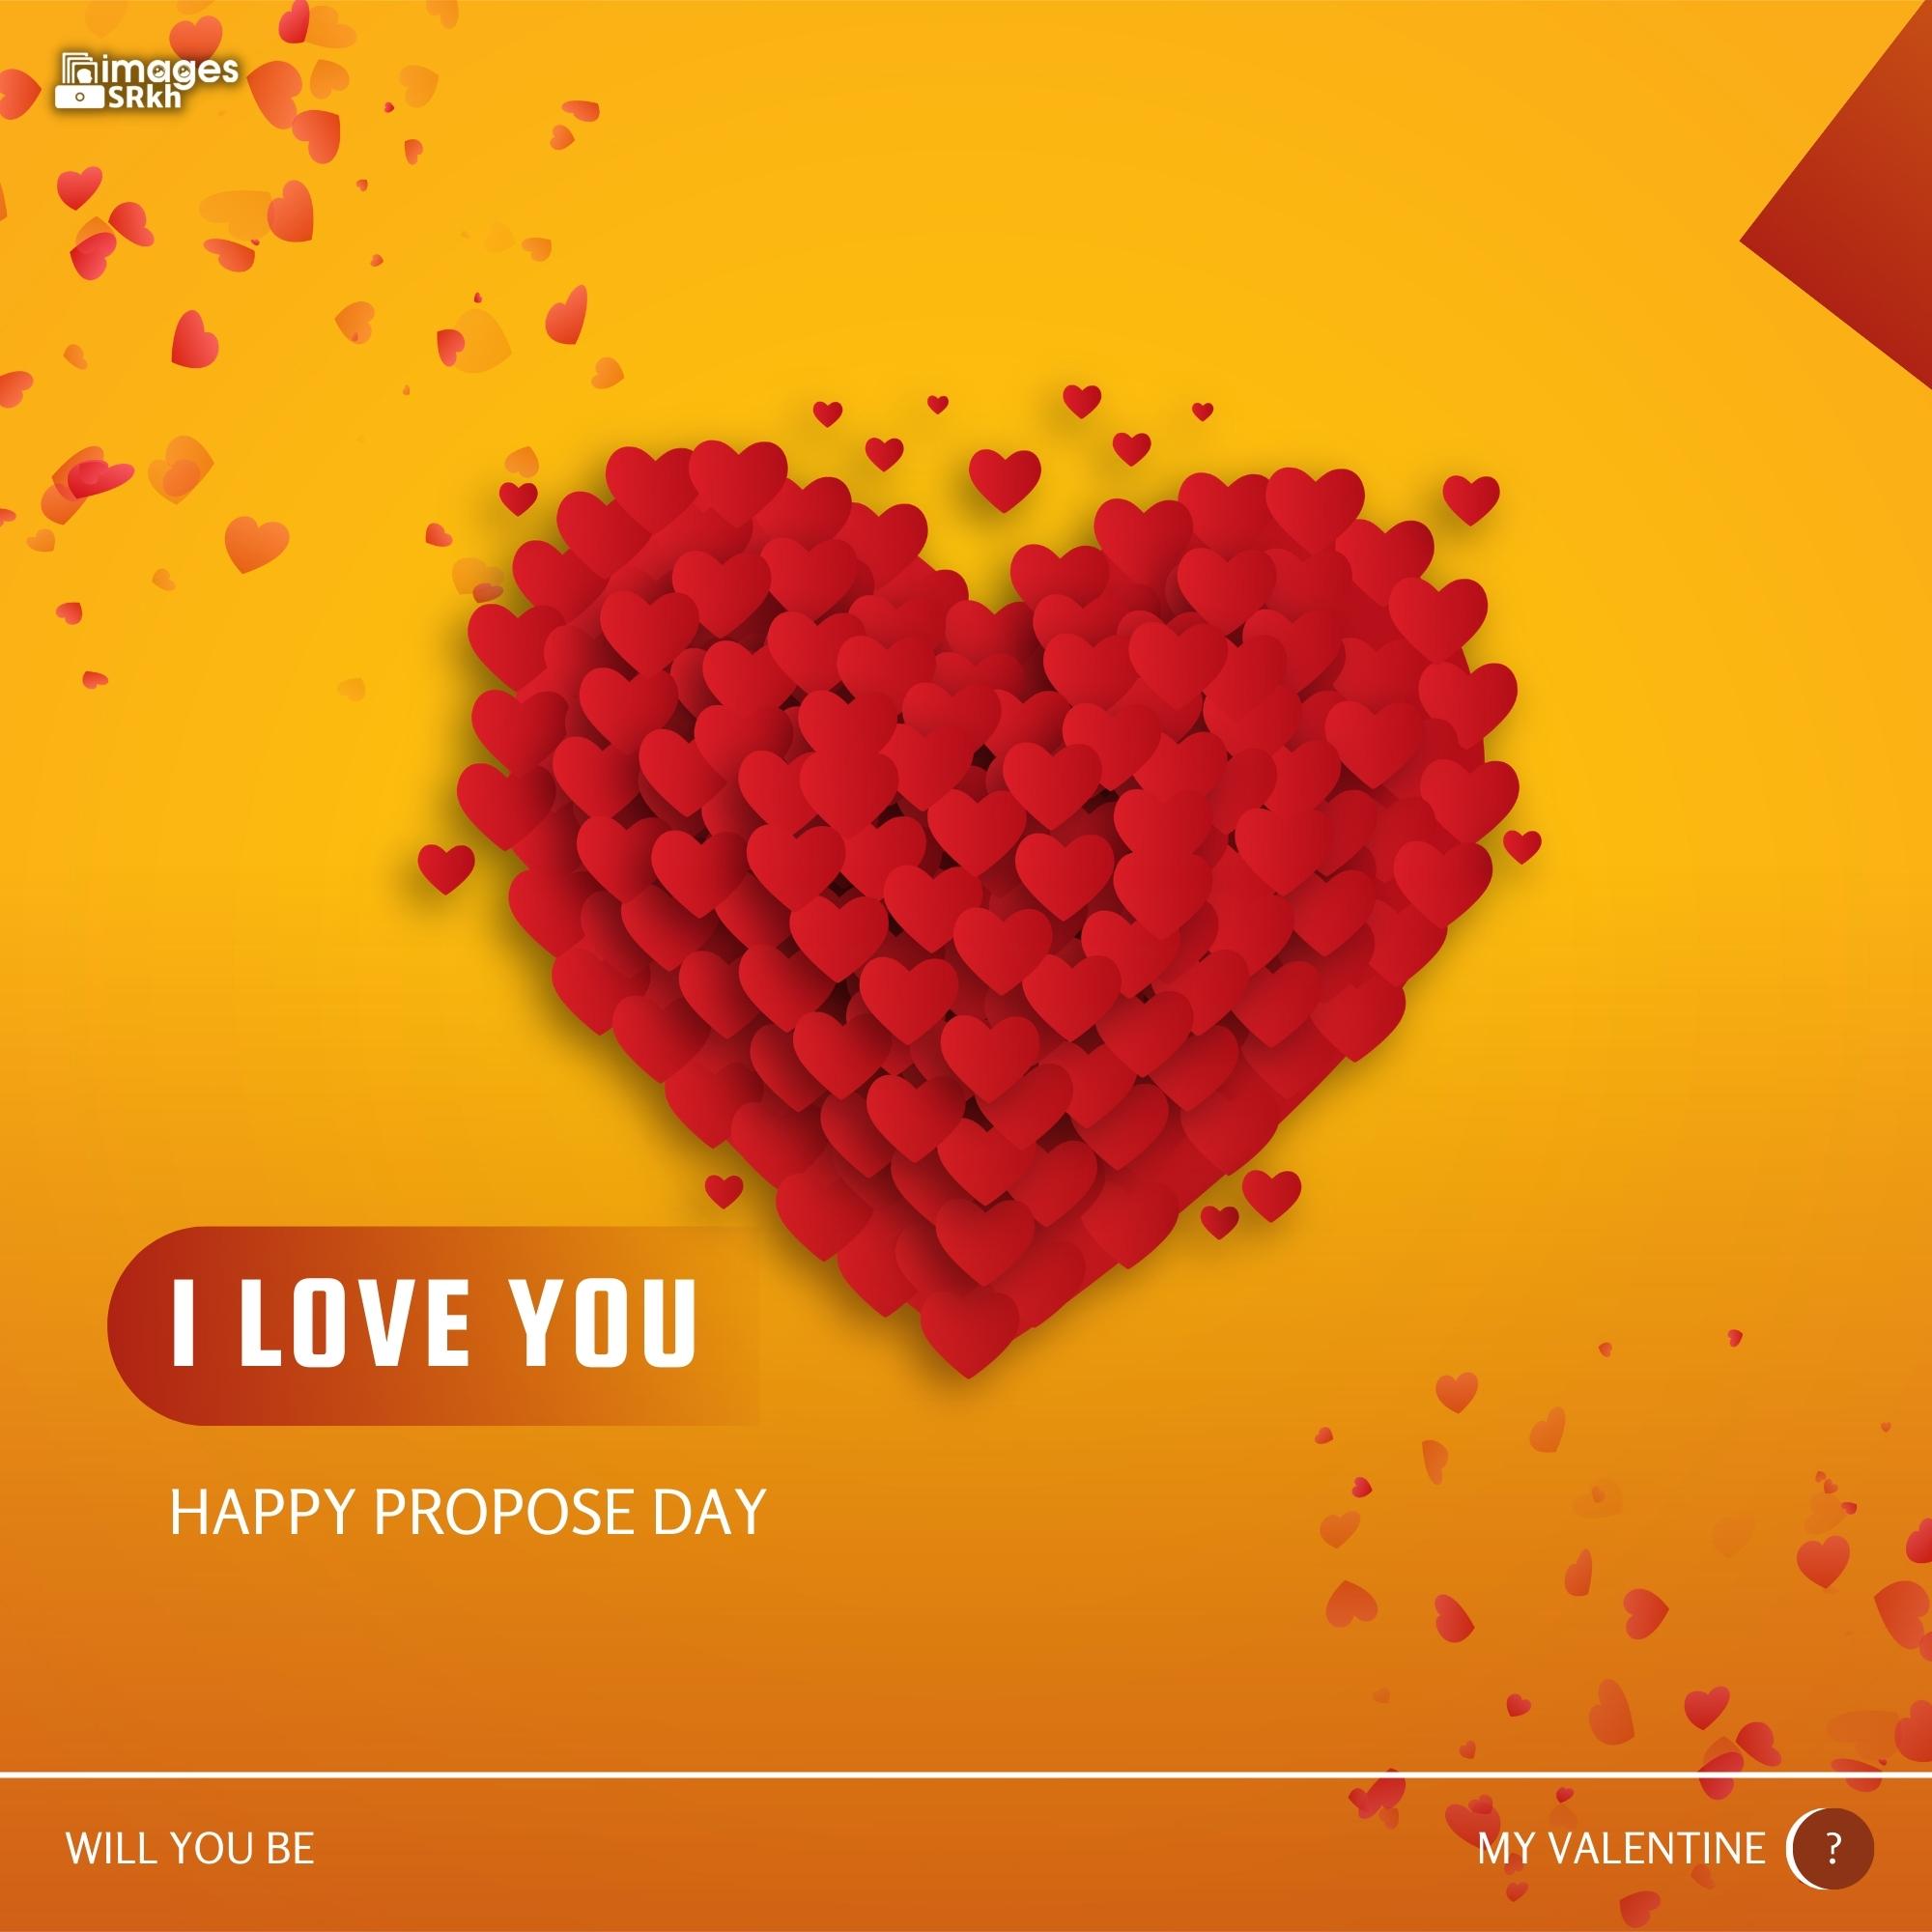 Happy Propose Day Images | 448 | I love you will you be my valentine